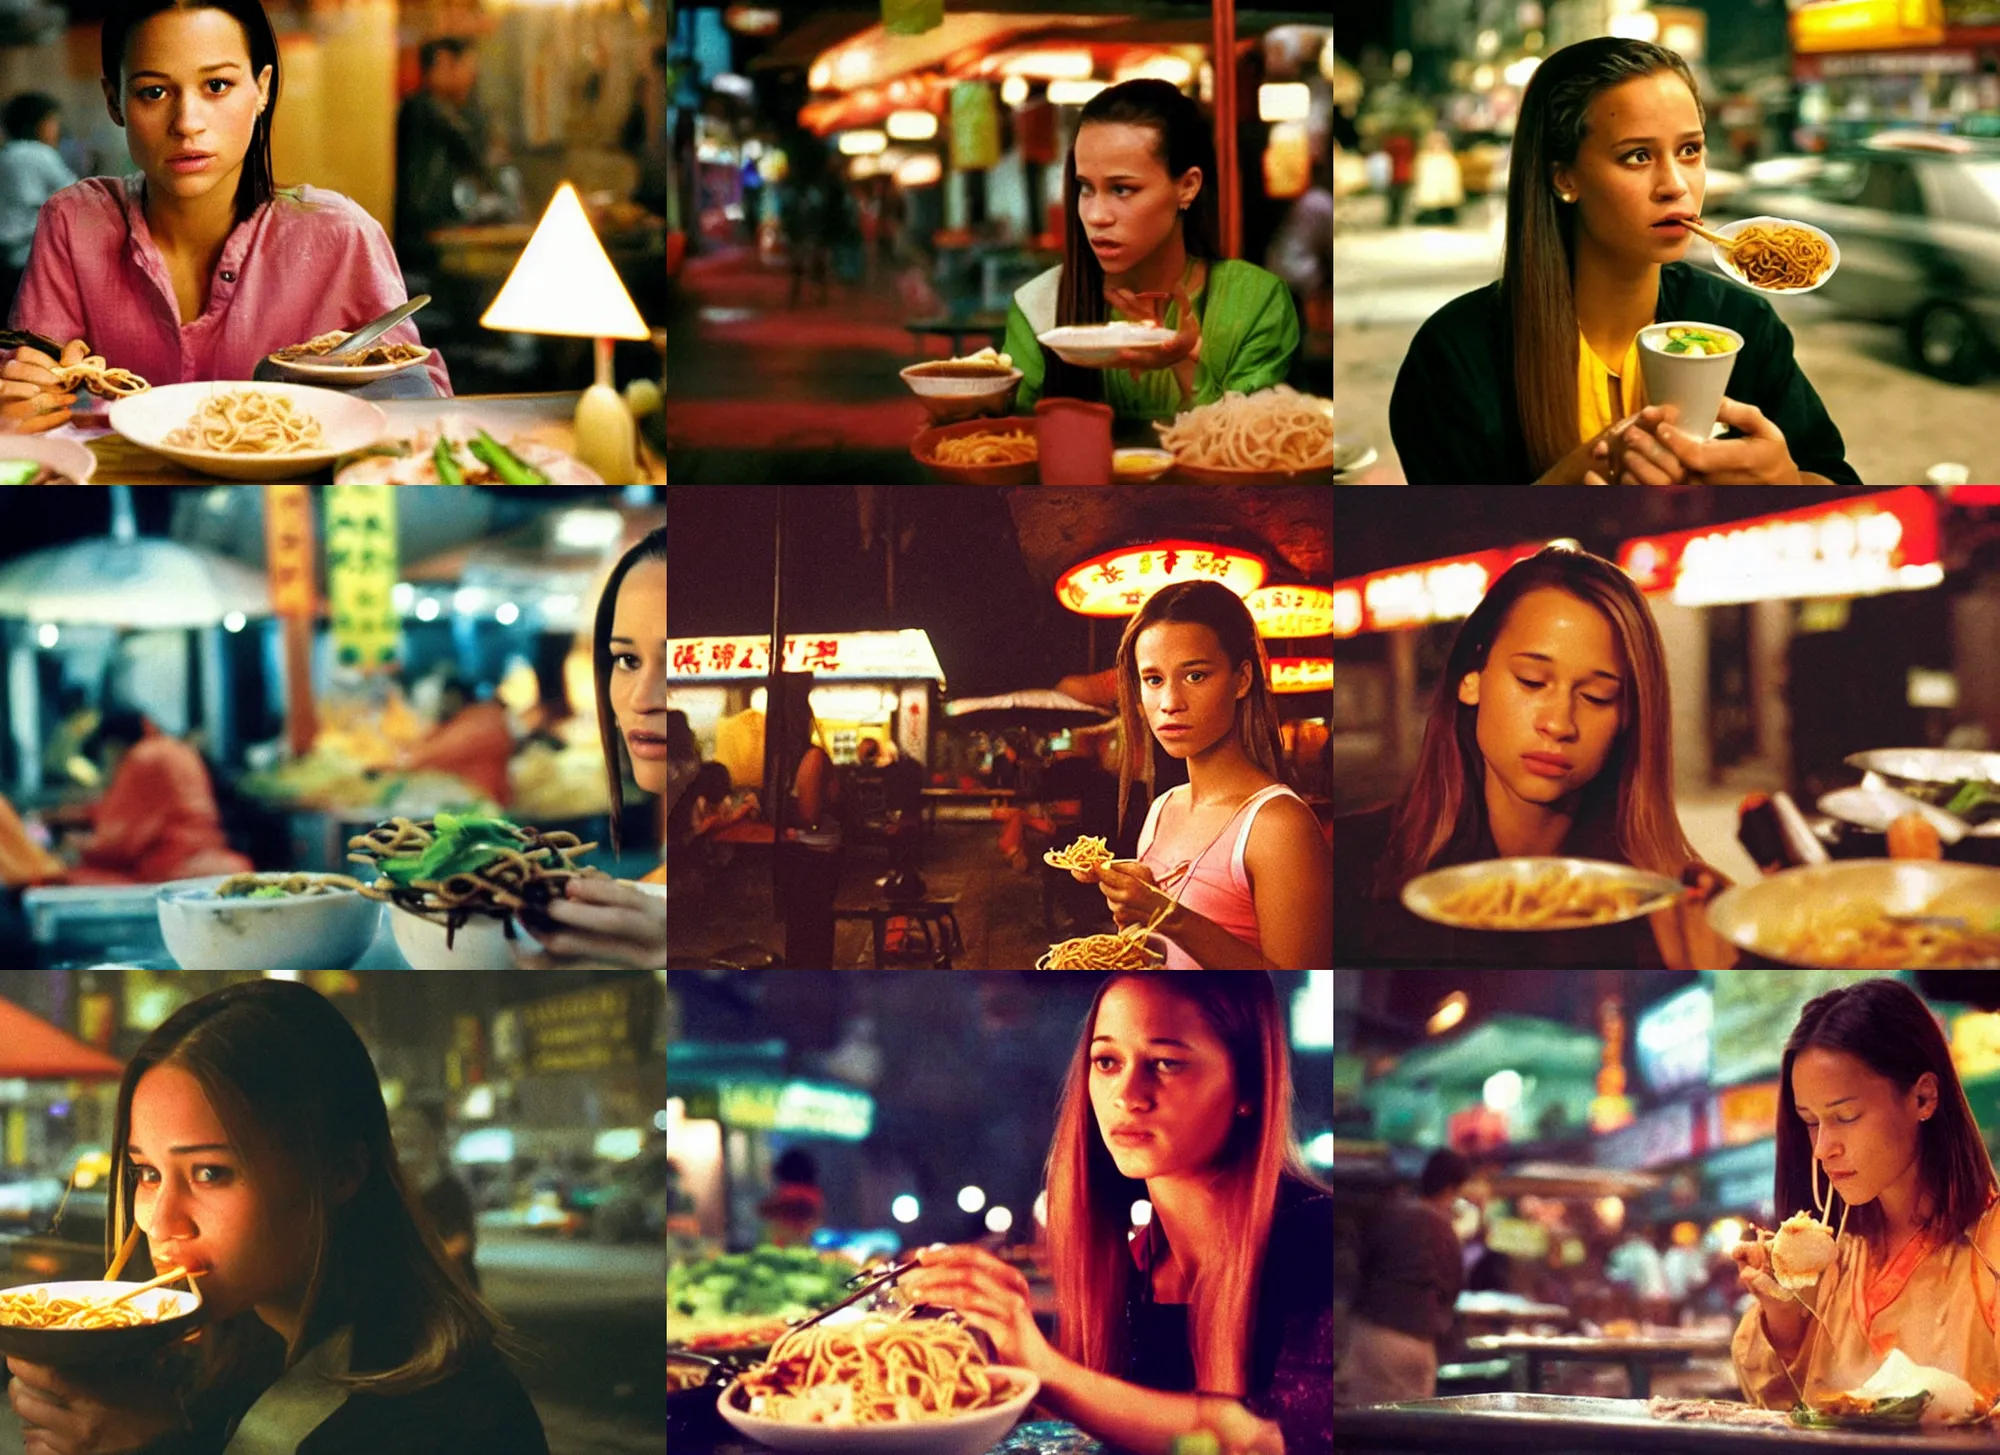 Prompt: A close-up, color outdoor film still of a Alicia Amanda Vikander Eating noodles at a Asian food stall, ambient lighting at night, from Matrix(1999).